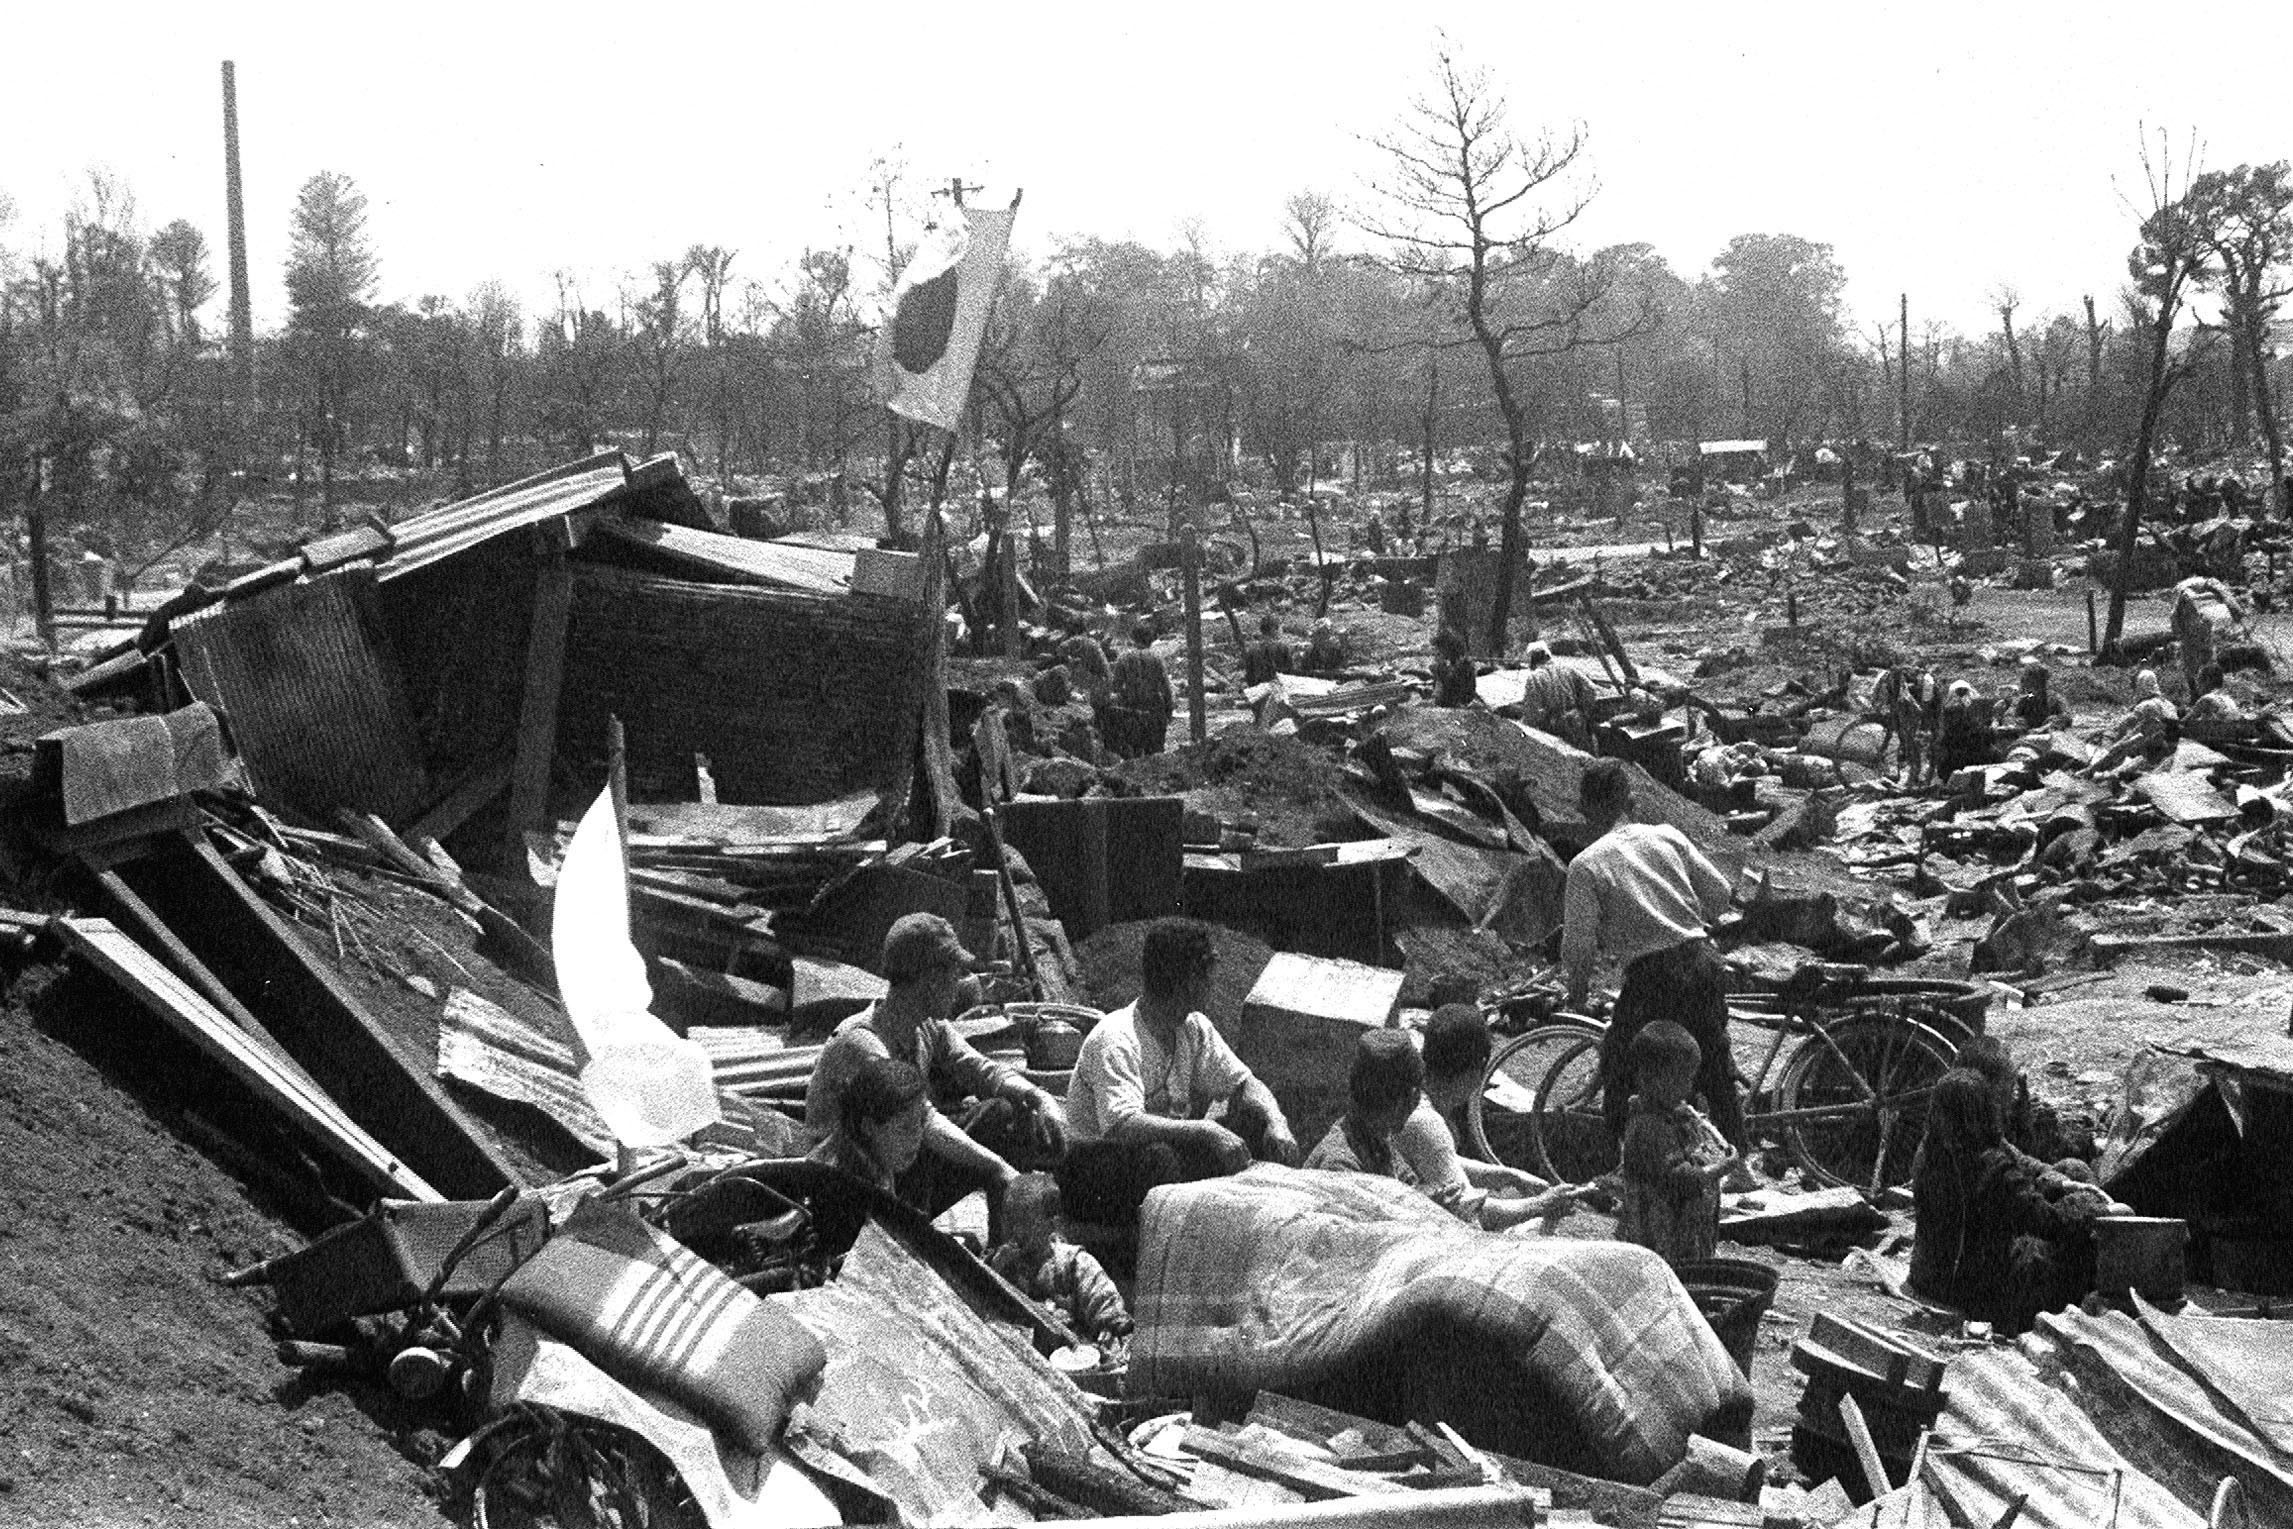 Tokyo, which had burned during the war, has arisen from the devastation over the past 70 years. | KYODO